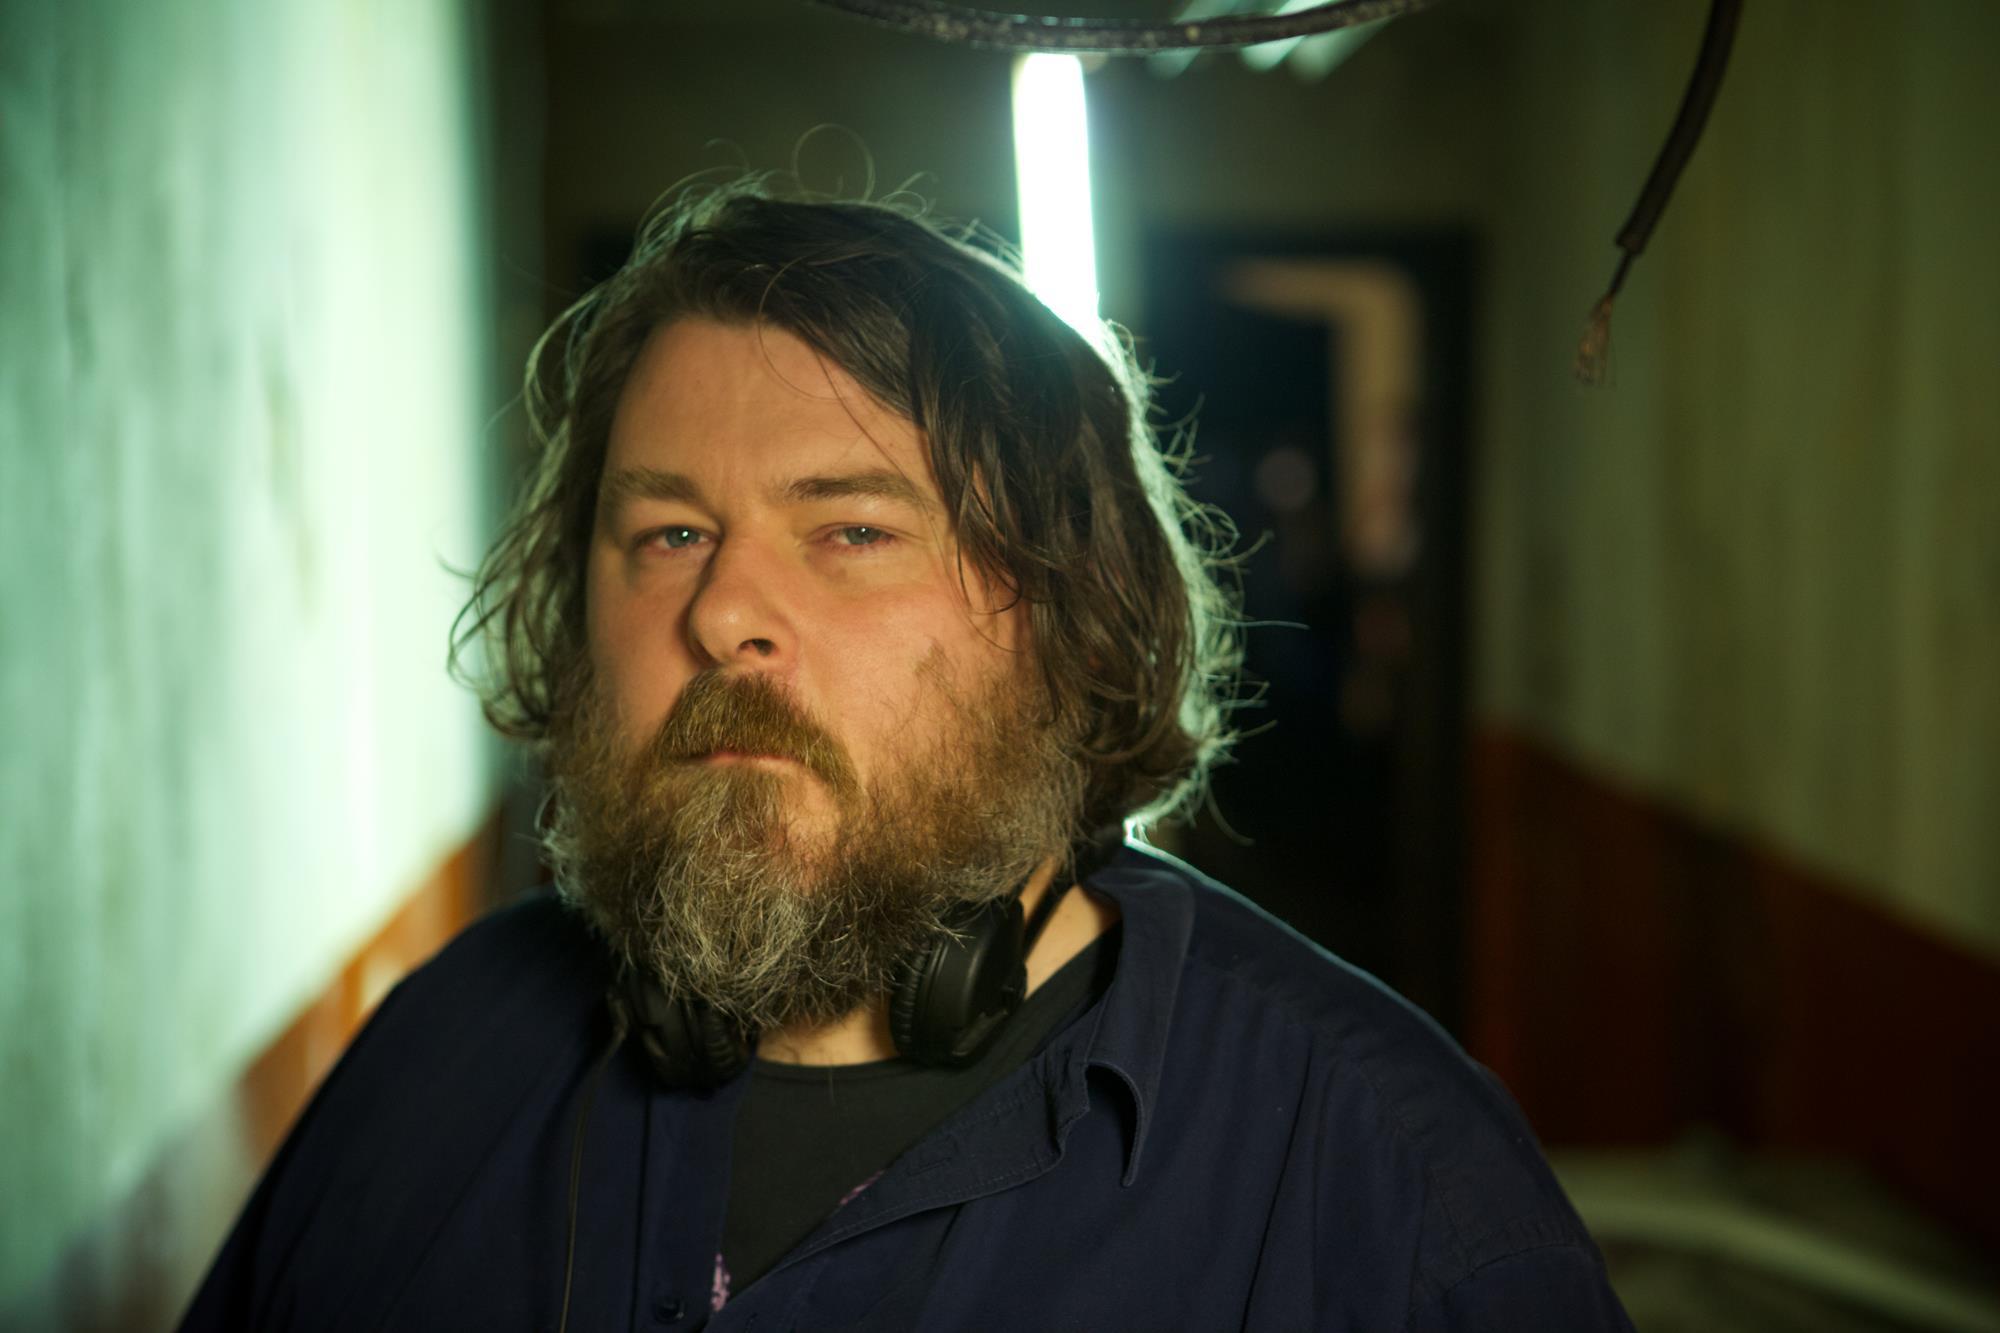 https://d1nslcd7m2225b.cloudfront.net/Pictures/2000x2000fit/7%2F4%2F9%2F1292749_Free-Fire-Ben-Wheatley-credit-Kerry-Brown.jpg